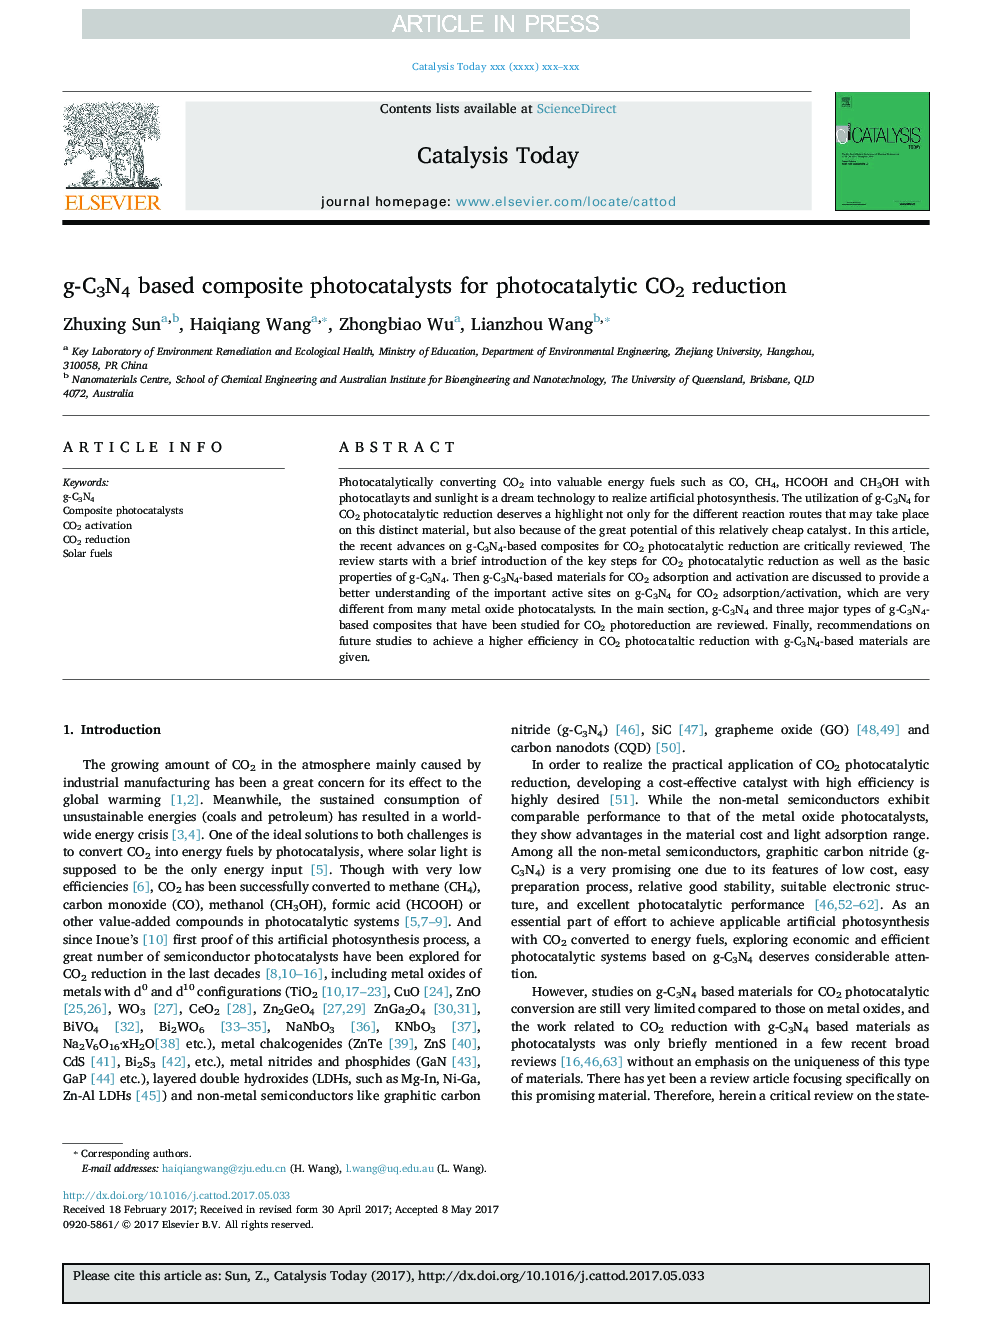 g-C3N4 based composite photocatalysts for photocatalytic CO2 reduction